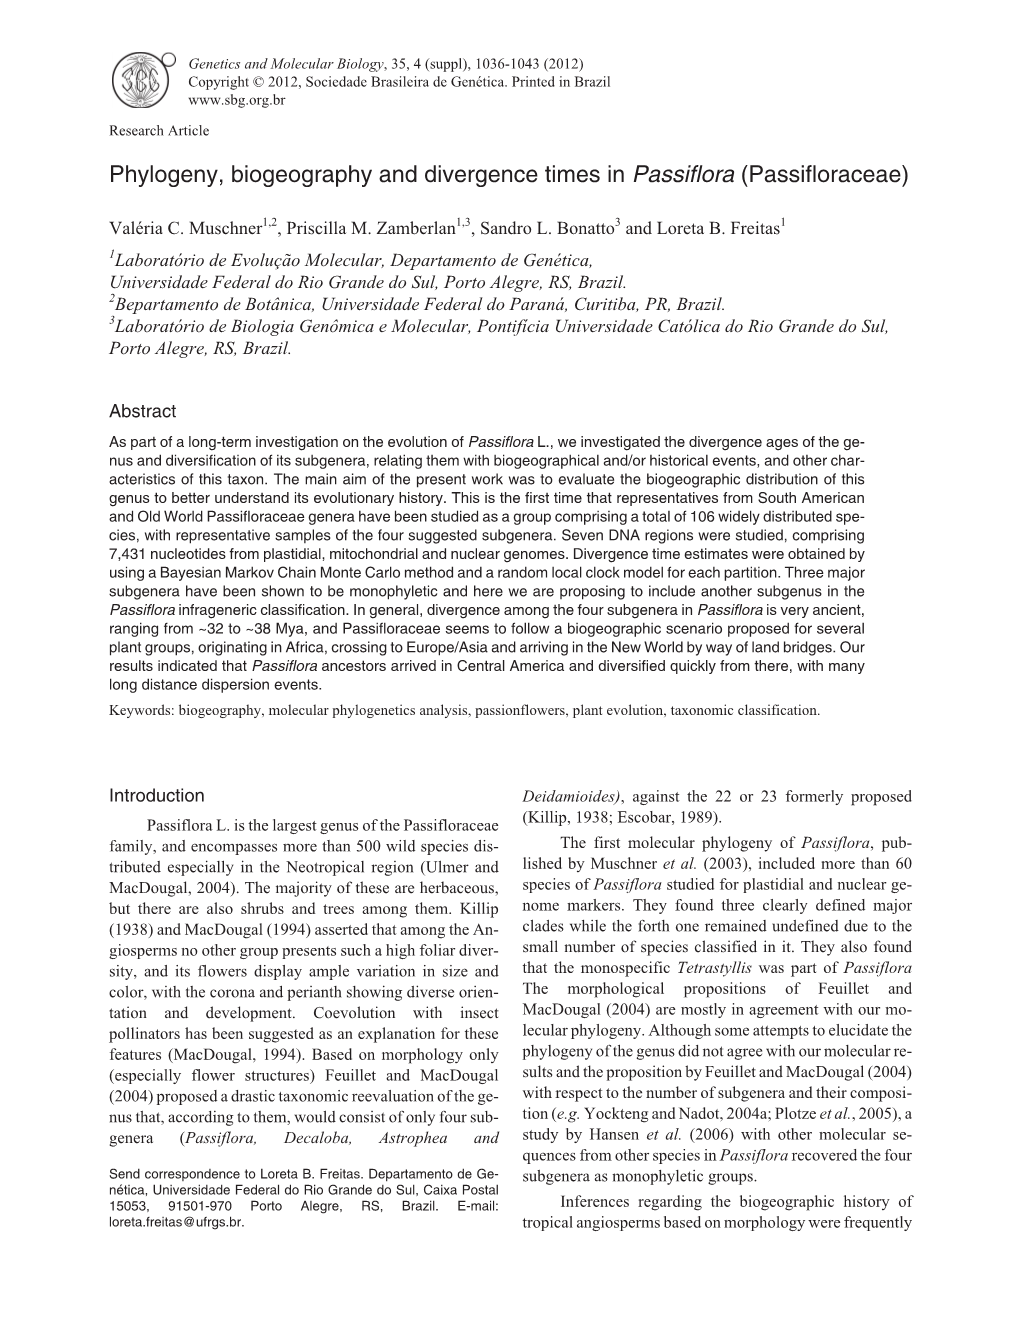 Phylogeny, Biogeography and Divergence Times in Passiflora (Passifloraceae)